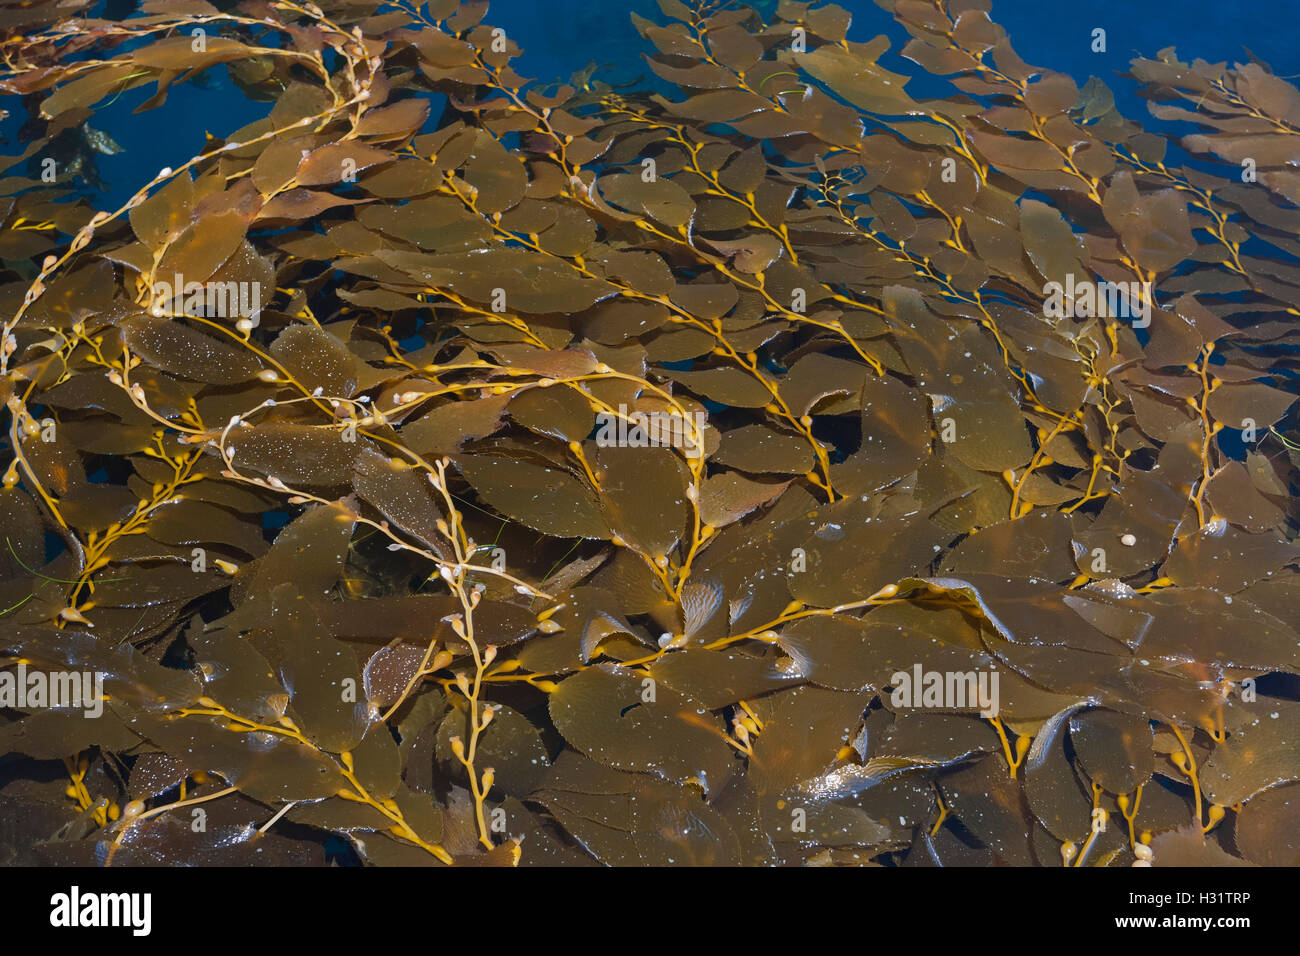 Giant Kelp (Macrocystis pyrifera), floating strands of this brown macroalgae form a thick mat at the surface- the canopy of a he Stock Photo